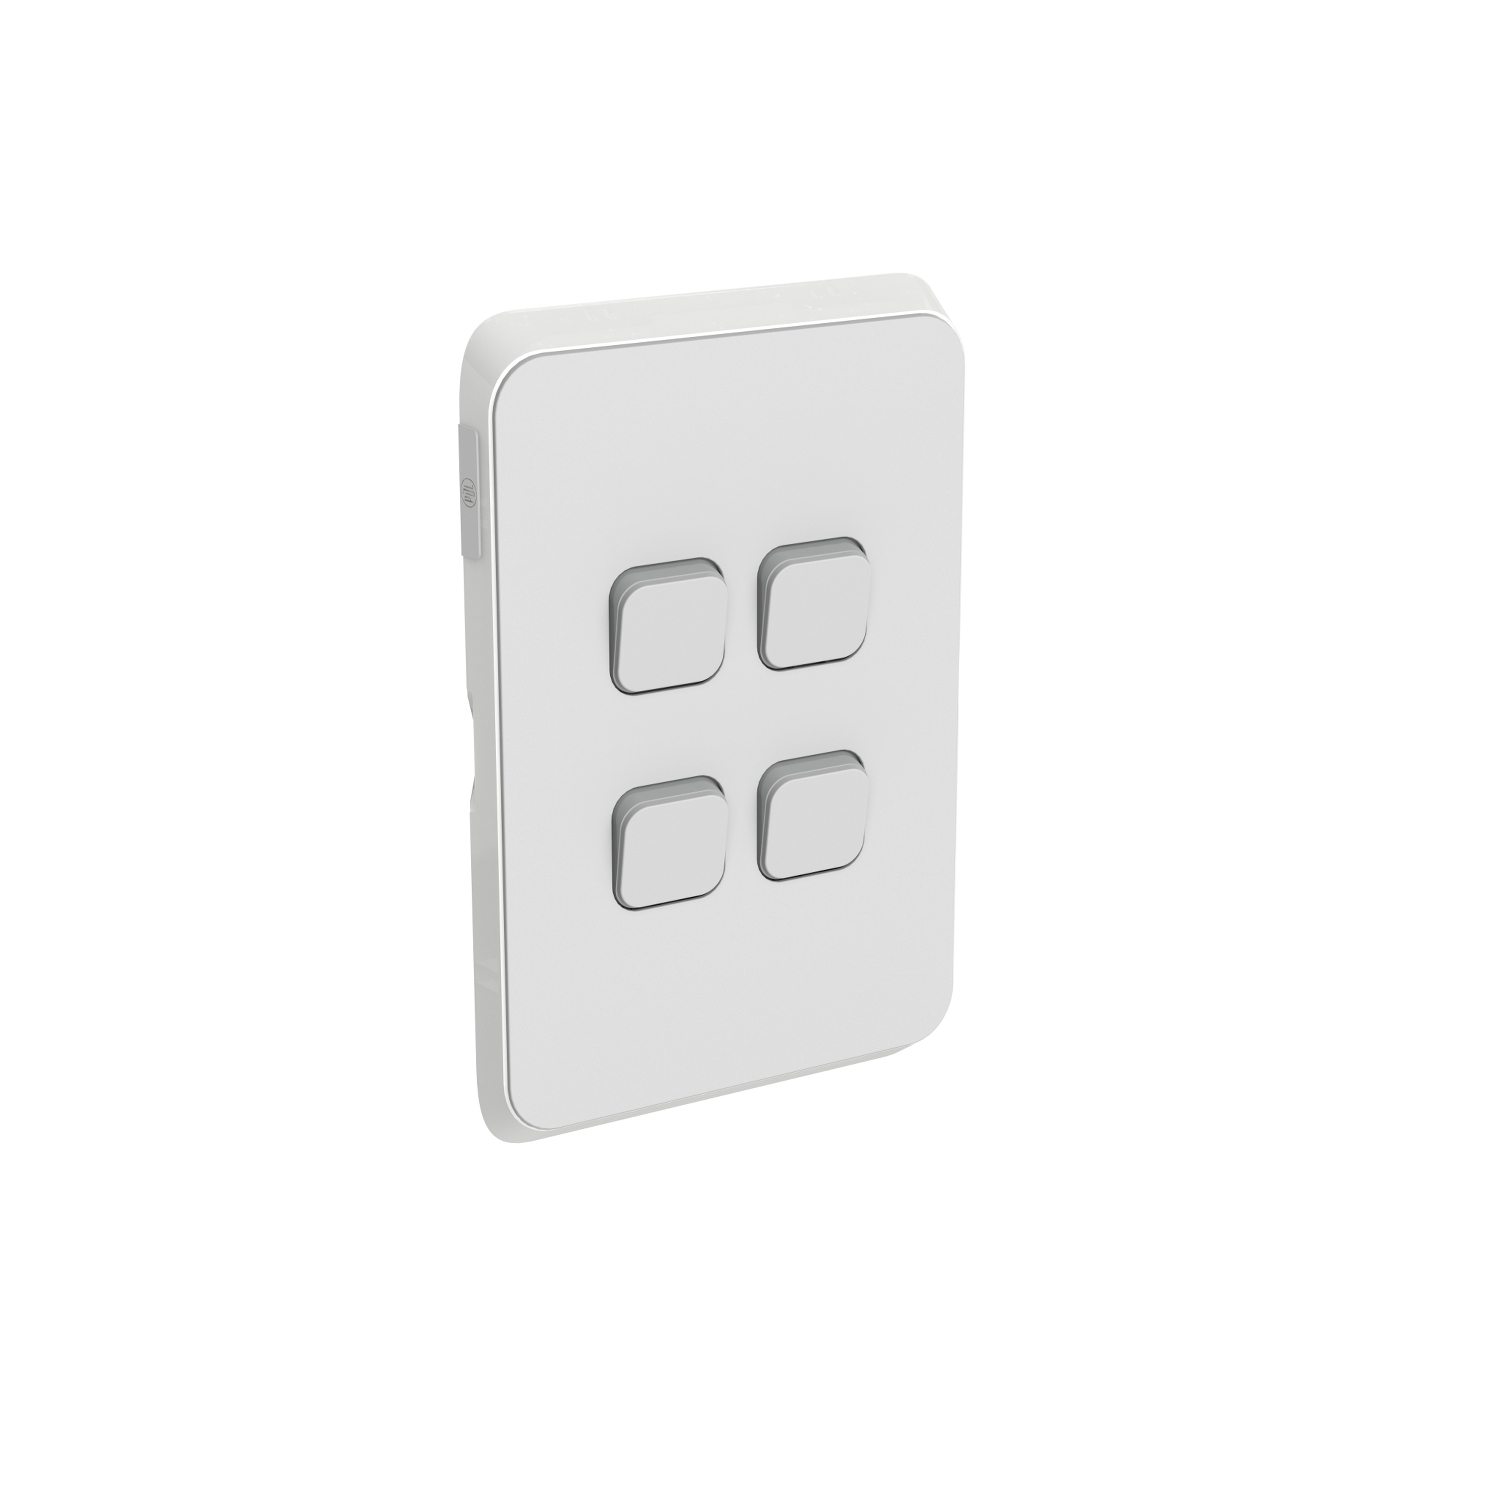 PDL384C-CY - PDL Iconic Cover Plate Switch 4Gang - Cool Grey